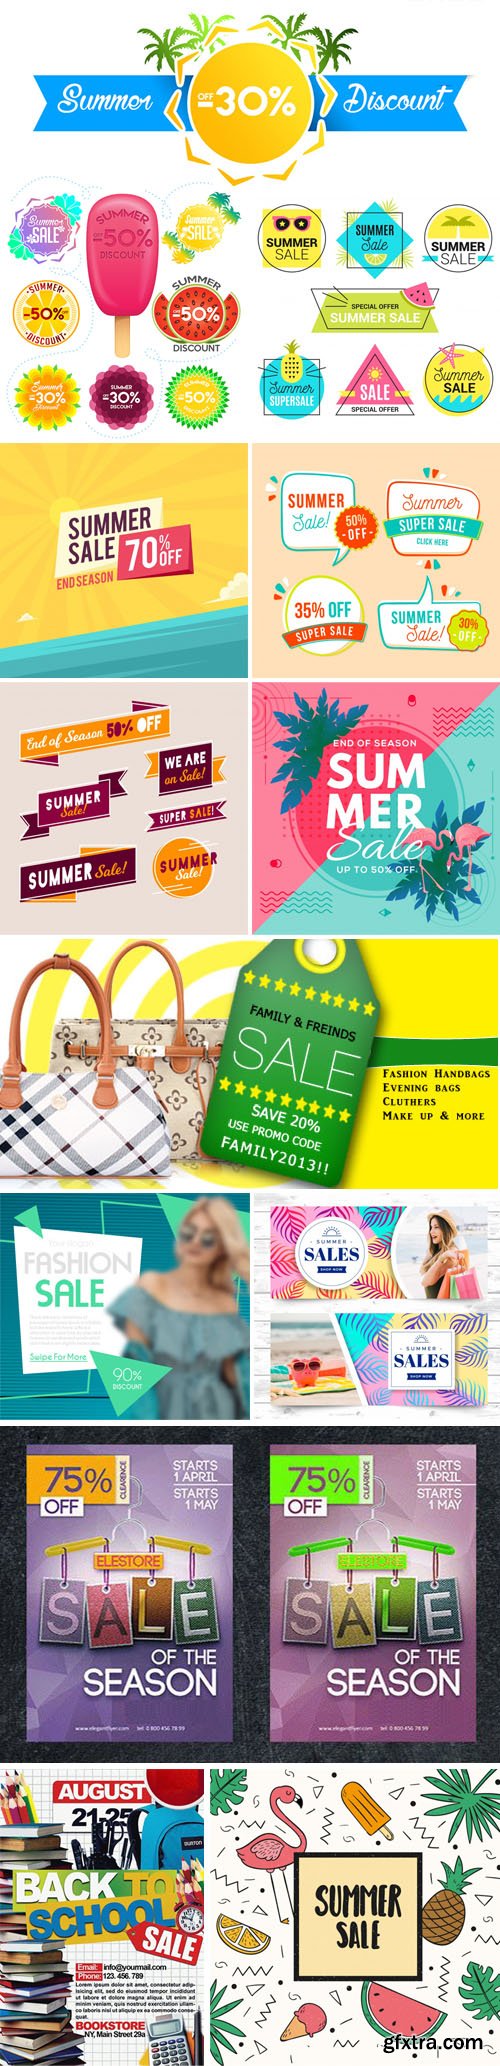 12 Hot Summer Sale/Discount Advertising [Ai/EPS/PSD]